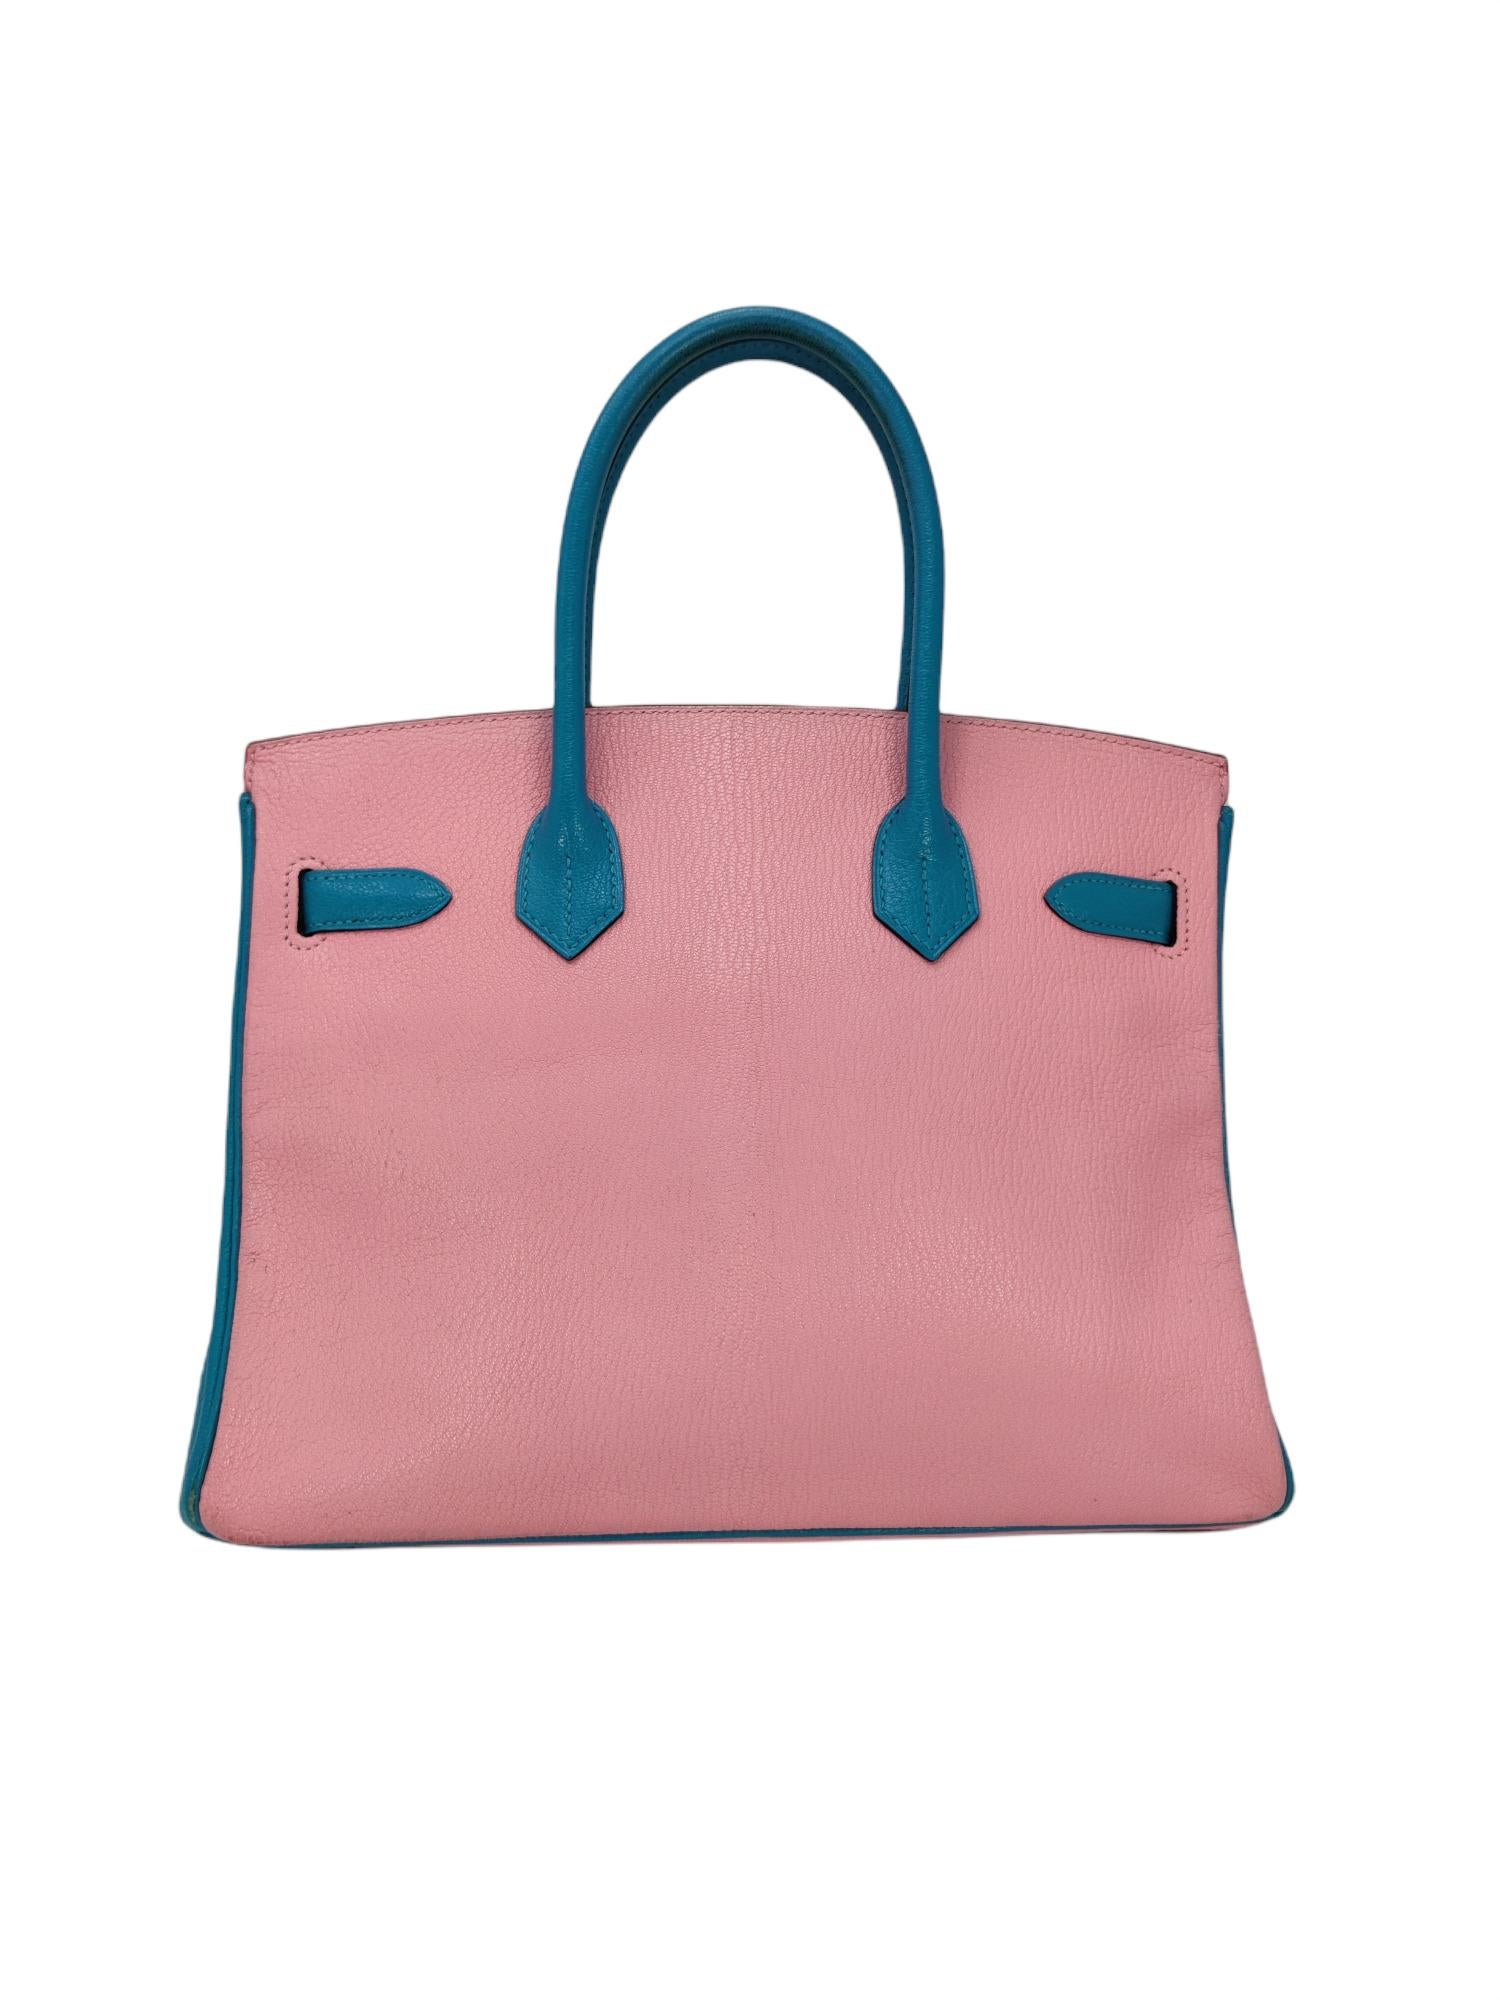 Hermes Horseshoe Stamp Special order Bi-Color Birkin 30 Chevre Pink and Turquoise 

Pre-loved - 8/10 overall condition

EXTERIOR: Visible scuffing/color marks on corners and front of the bag
HANDLE(S): Visible darkening/discolorations.
INTERIOR